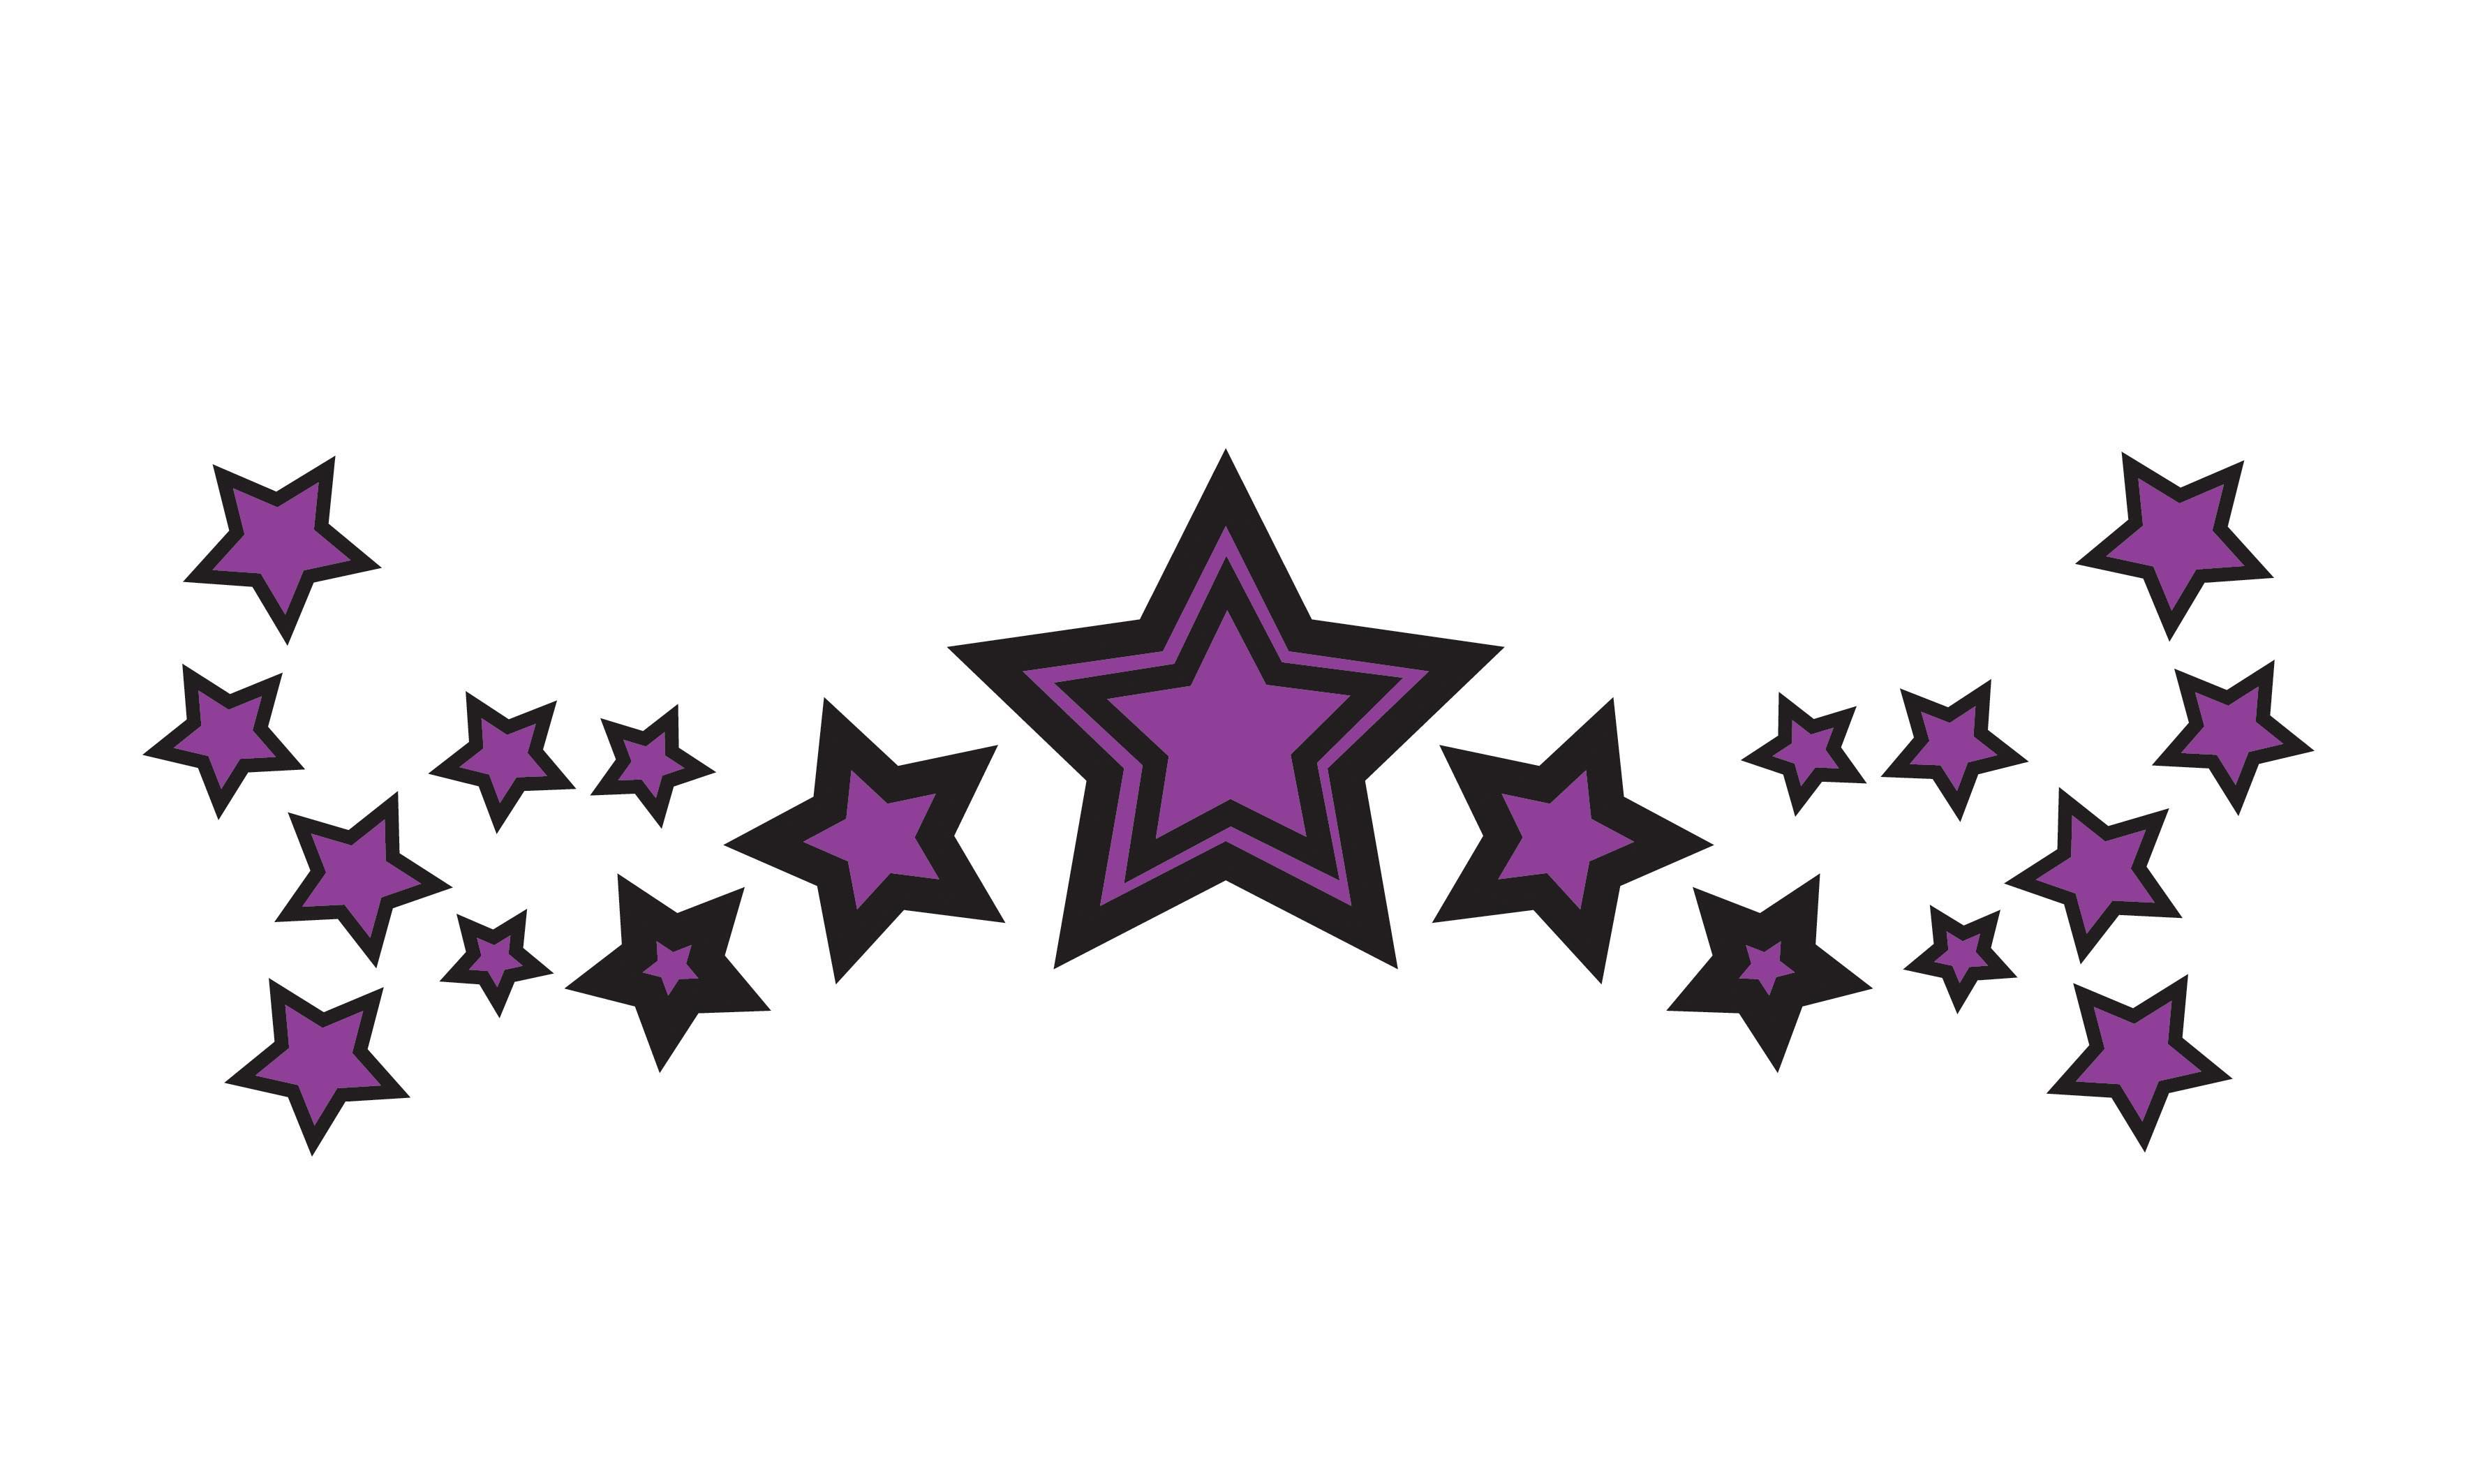 Stars Drawings - ClipArt Best